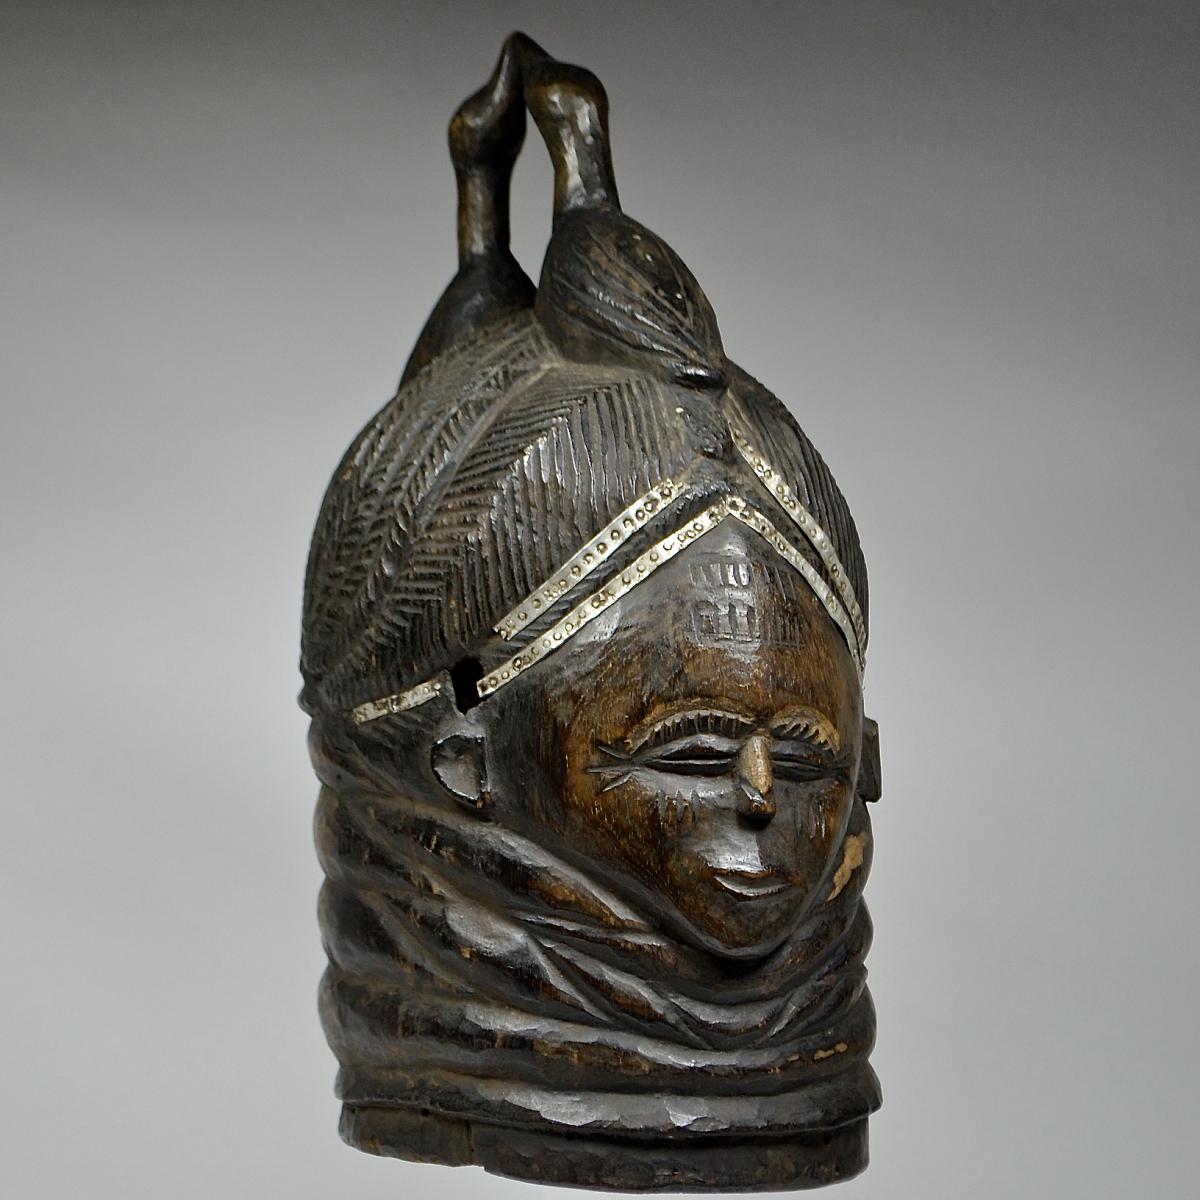 Sowei mask from the Sande society